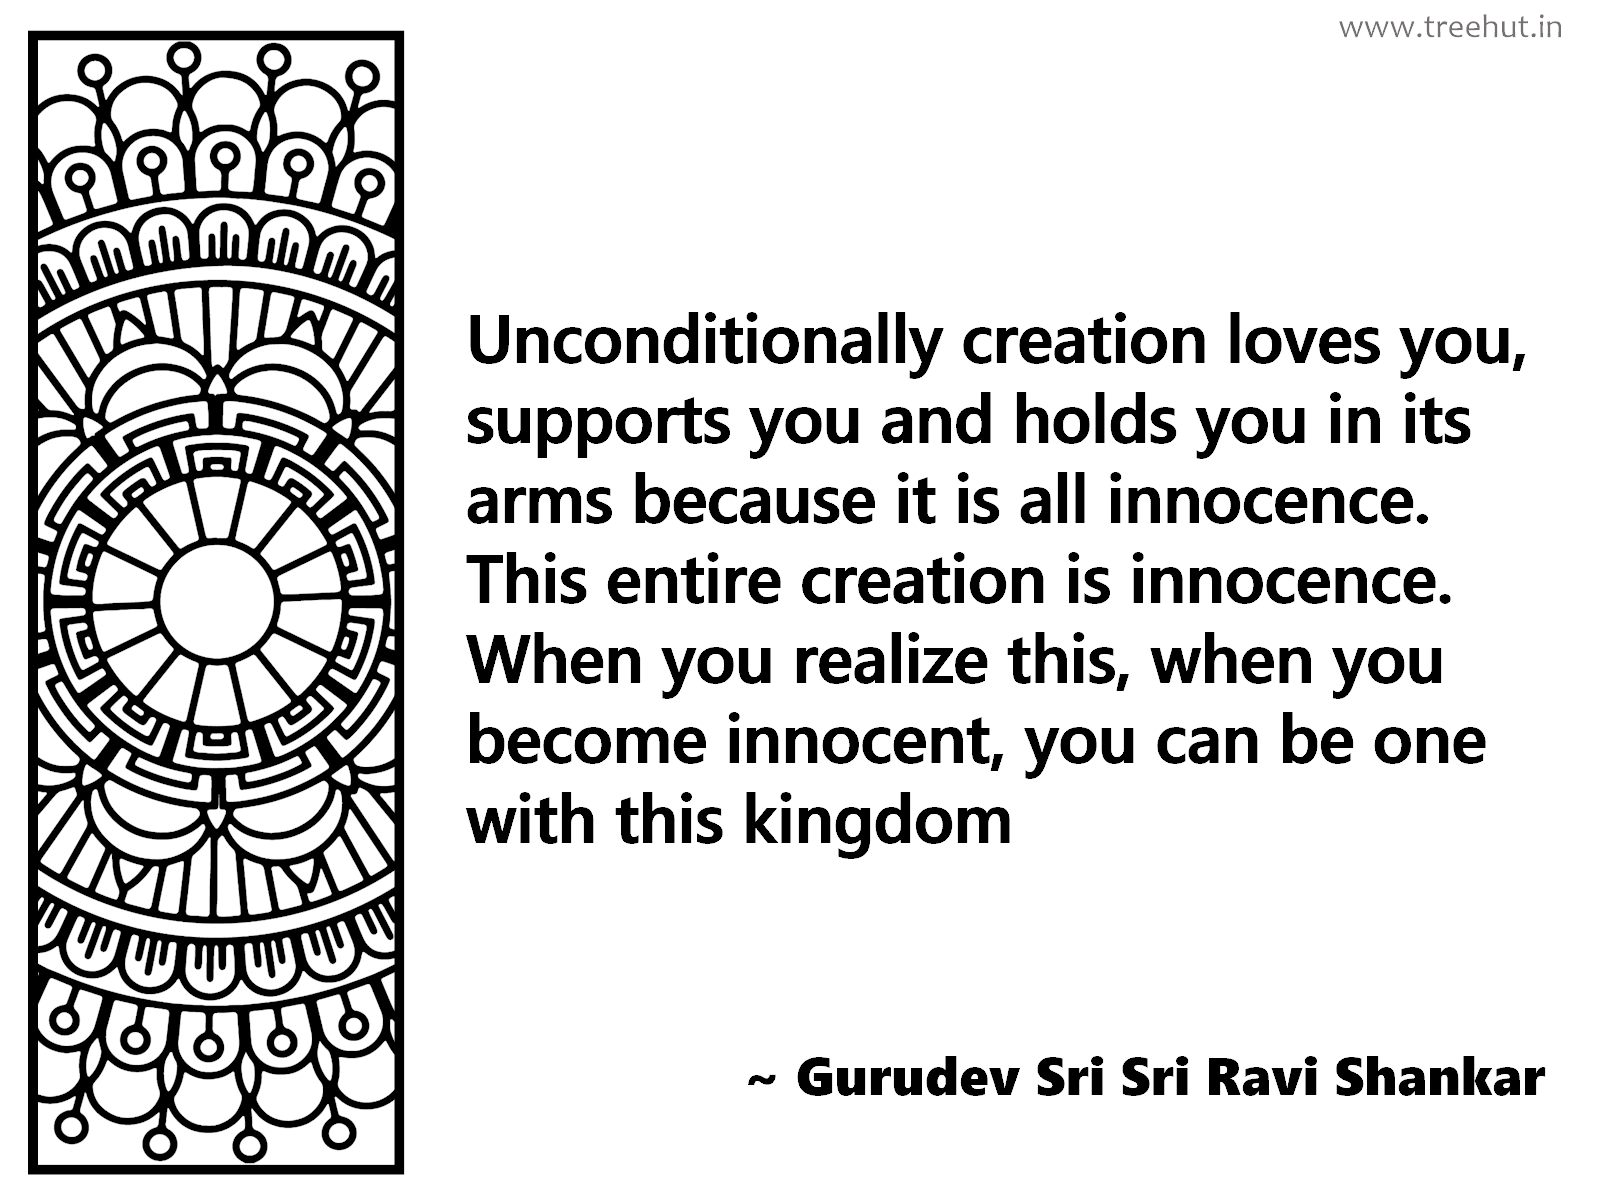 Unconditionally creation loves you, supports you and holds you in its arms because it is all innocence. This entire creation is innocence. When you realize this, when you become innocent, you can be one with this kingdom Inspirational Quote by Gurudev Sri Sri Ravi Shankar, coloring pages